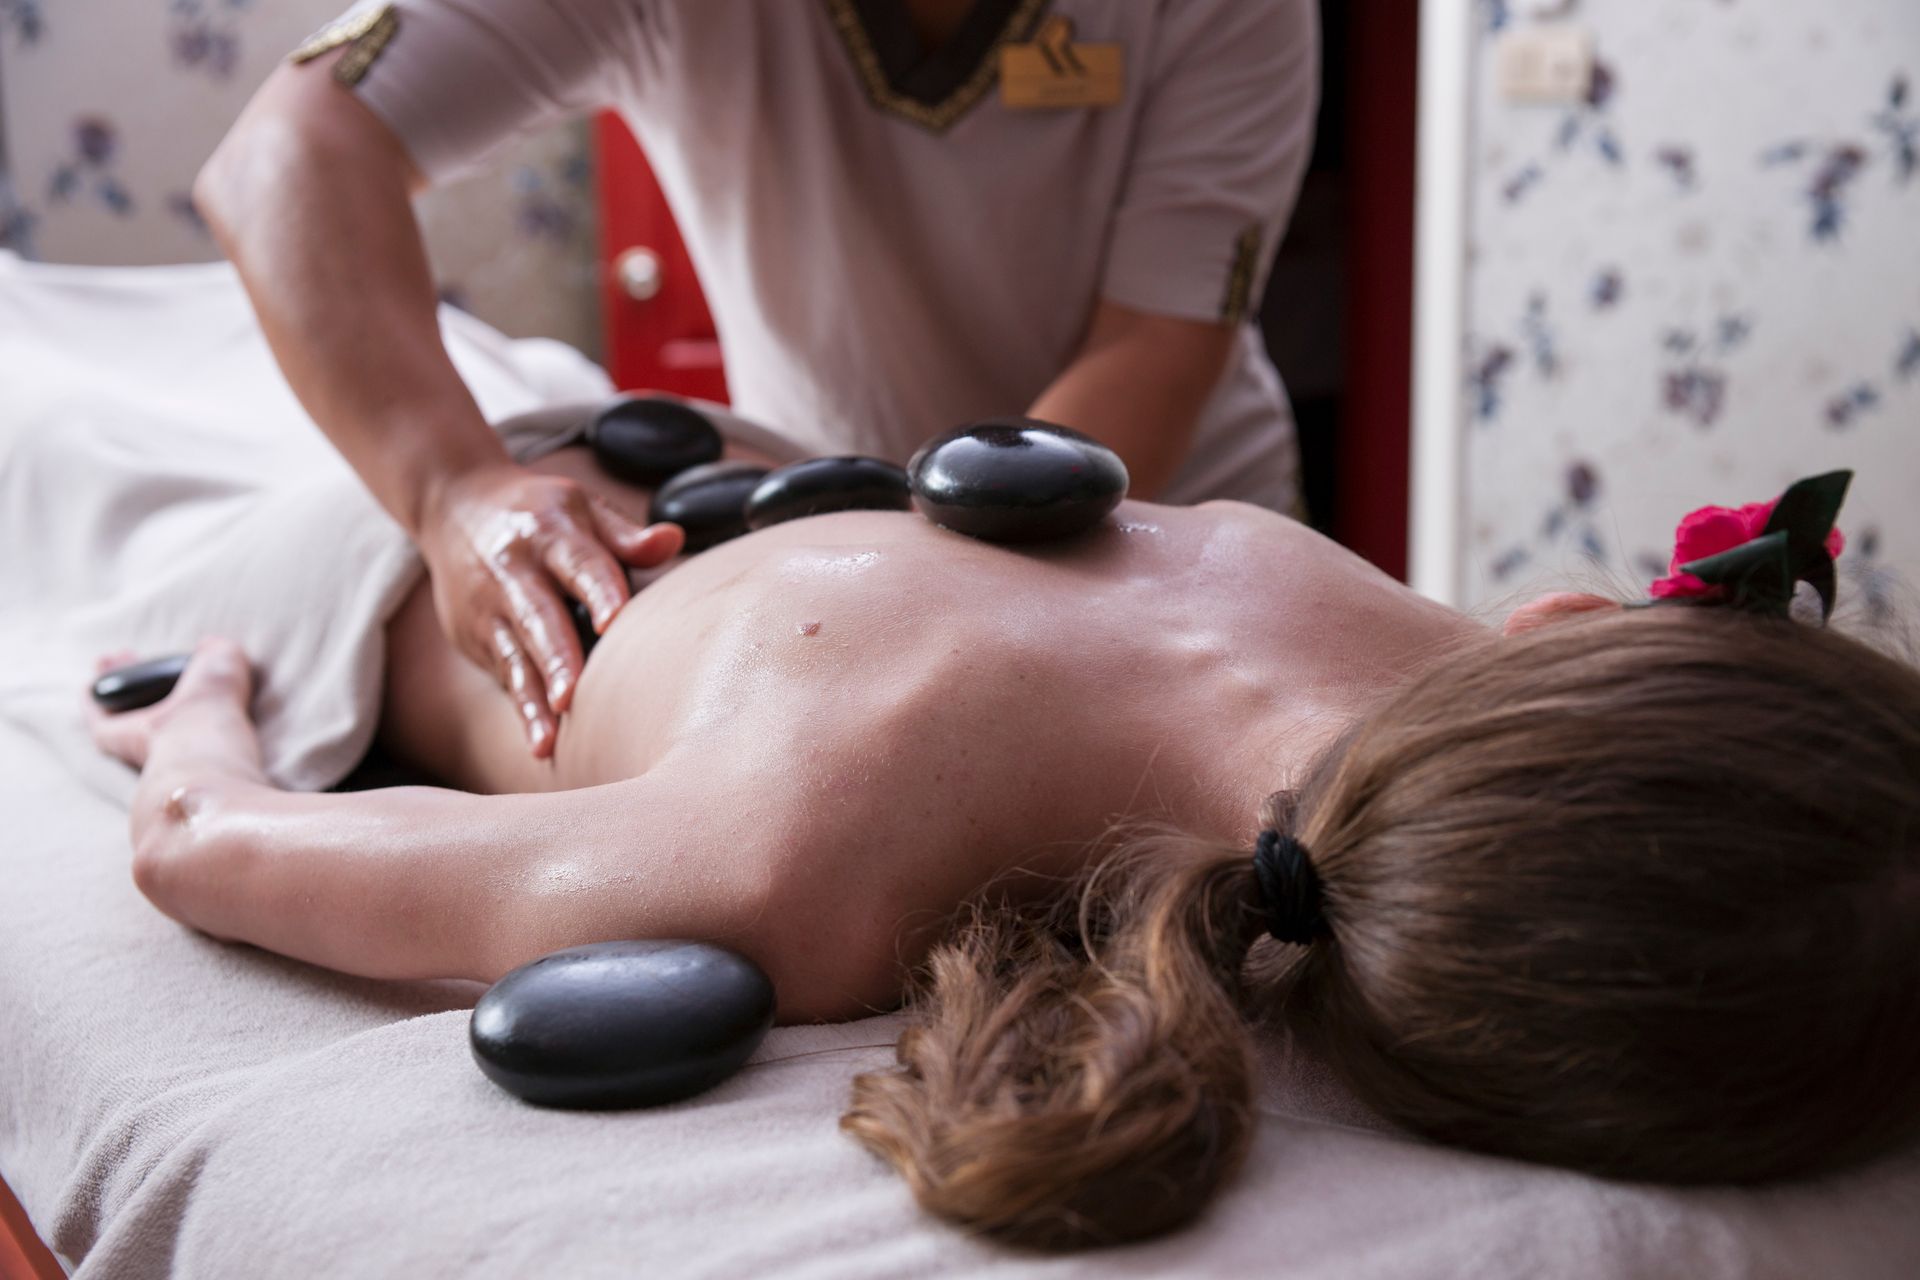 a woman is getting a hot stone massage at a spa .